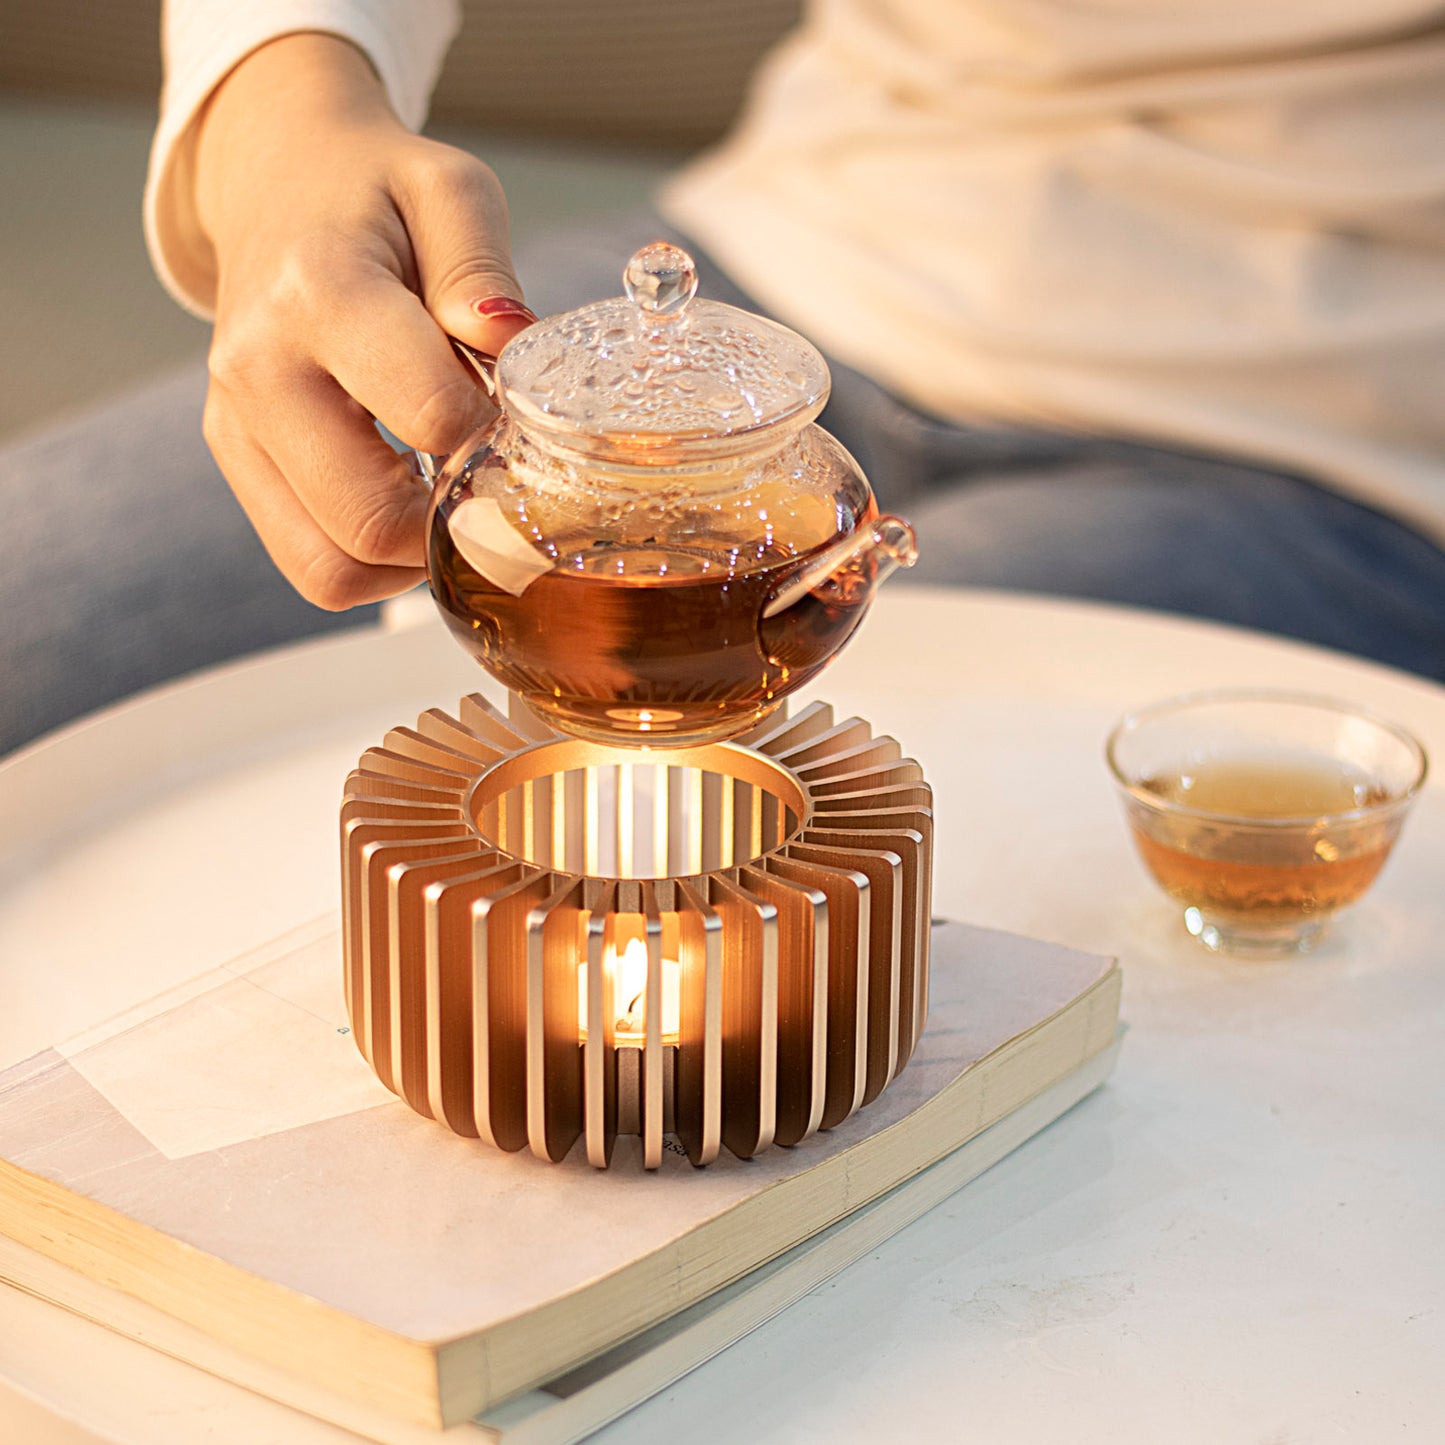 Universal Teapot Warmer - Beautiful Aluminum alloy Warmers|Tea Pot Heater in Frosted Gold with Ornate Design.